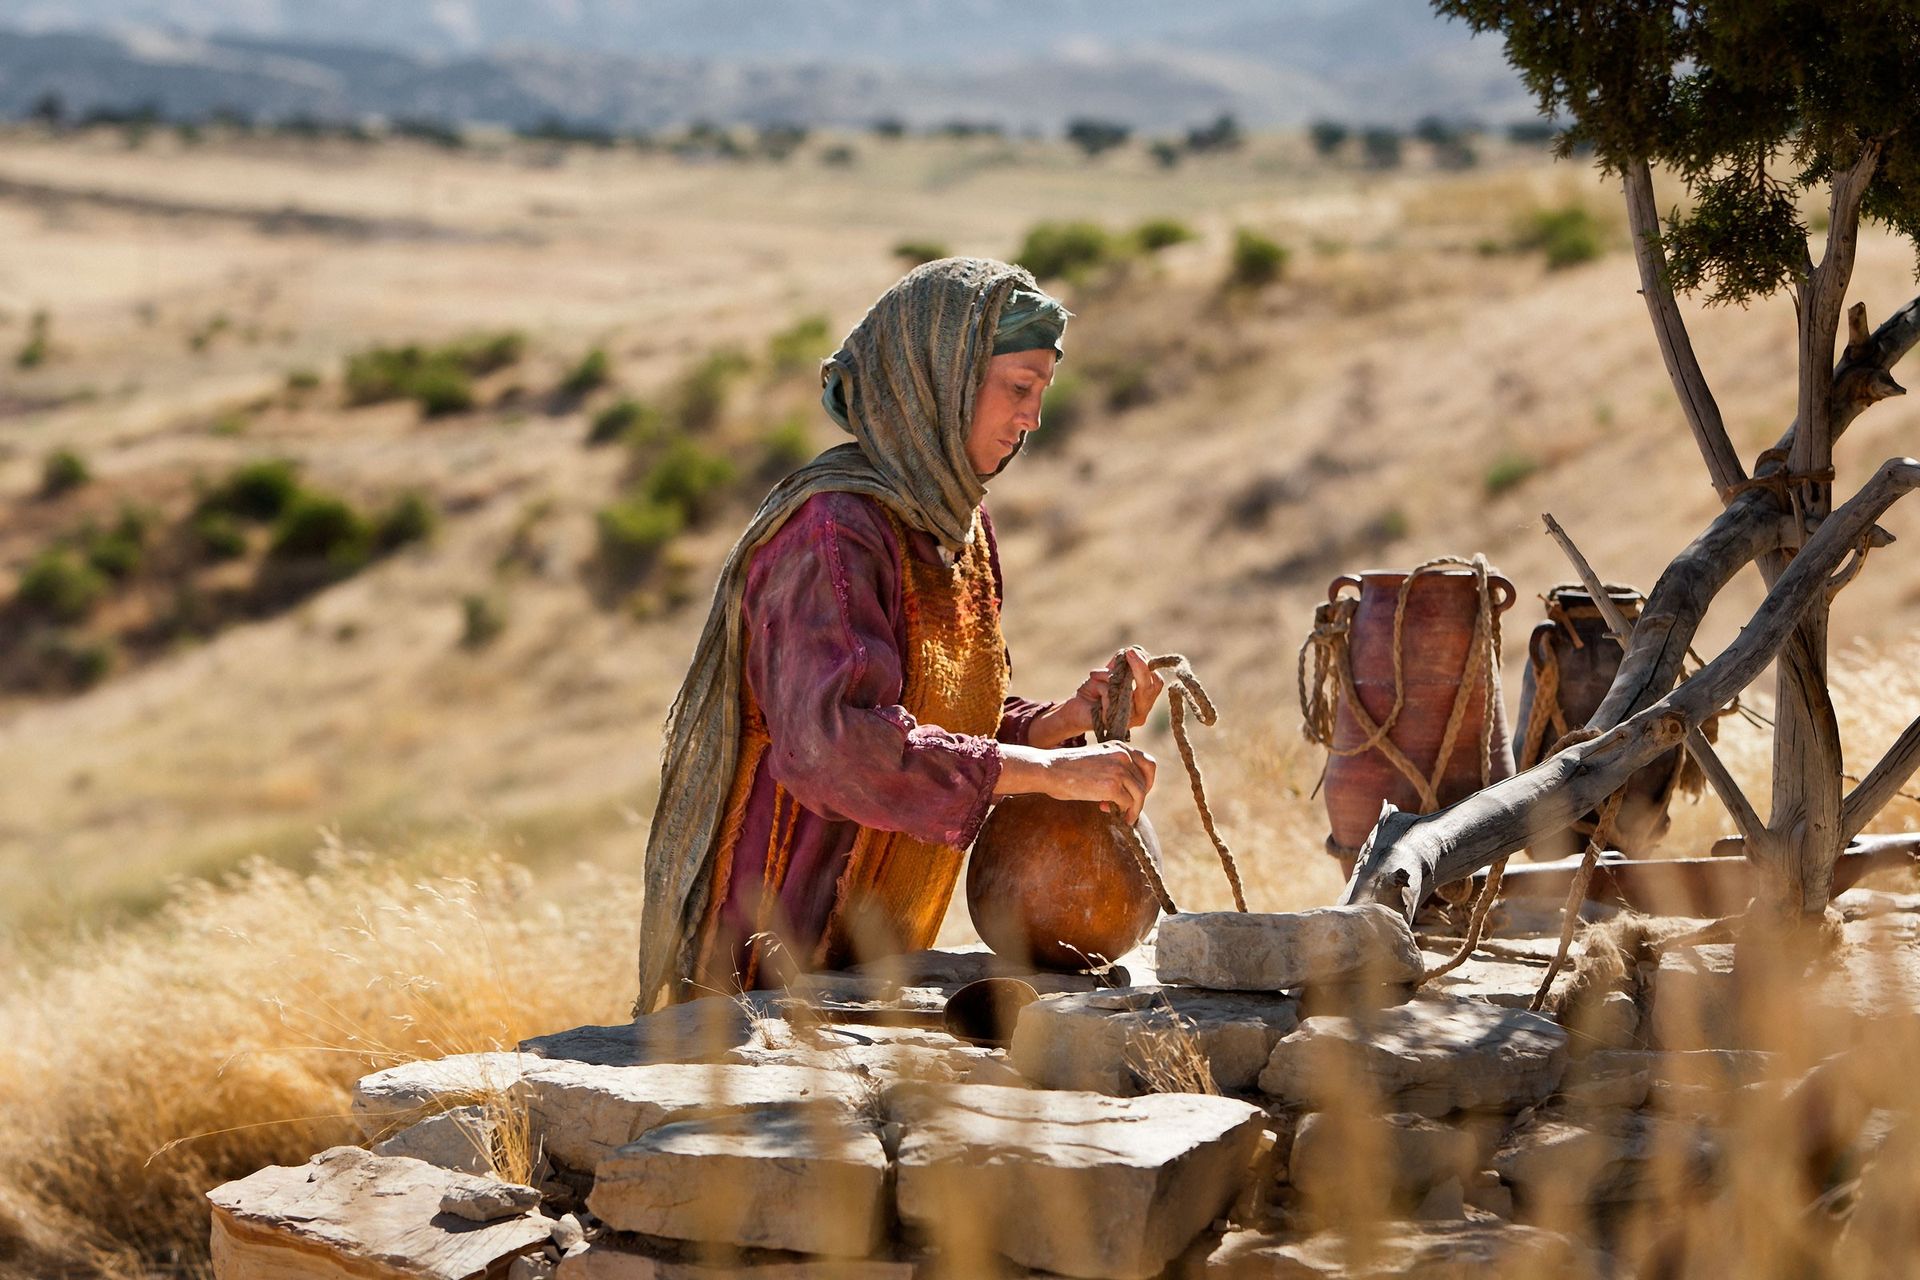 A woman of Samaria questions Jesus for speaking to her.